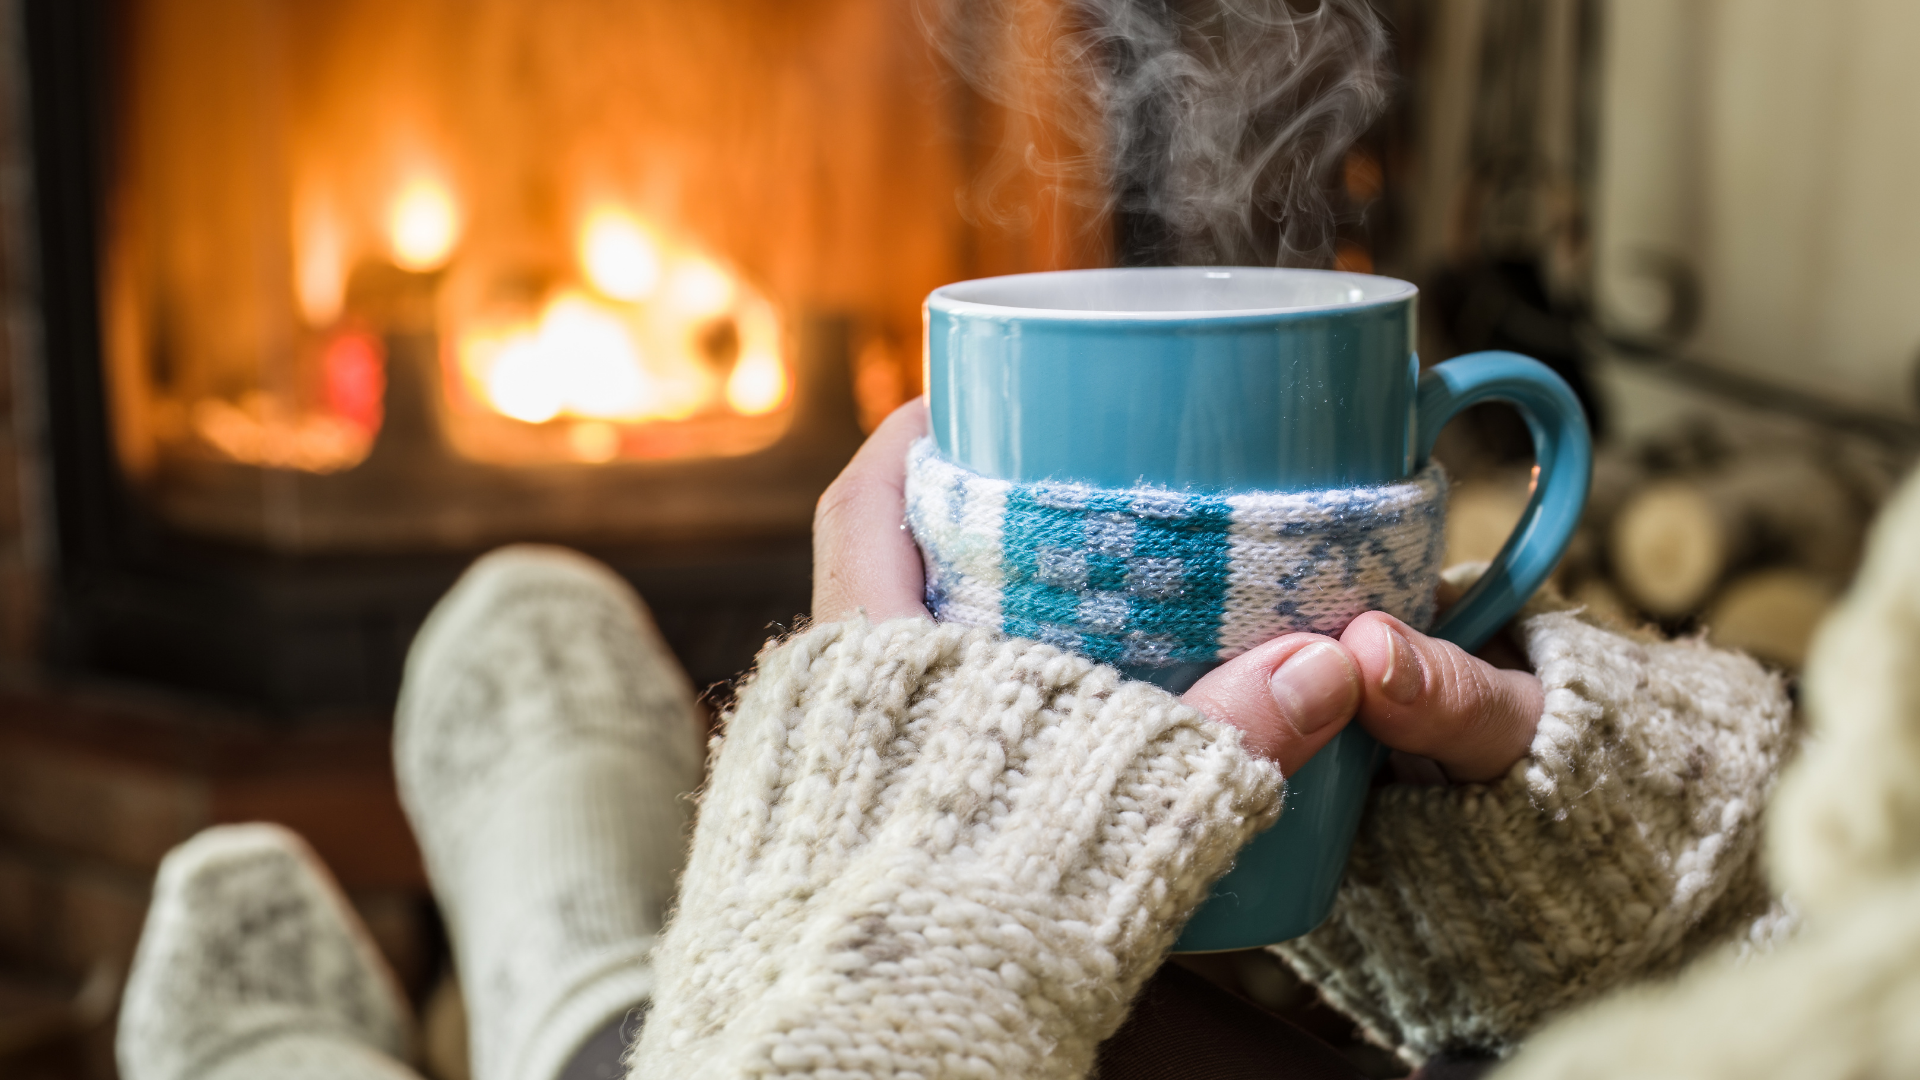 Picture of someone sitting by a fireplace, holding a mug.